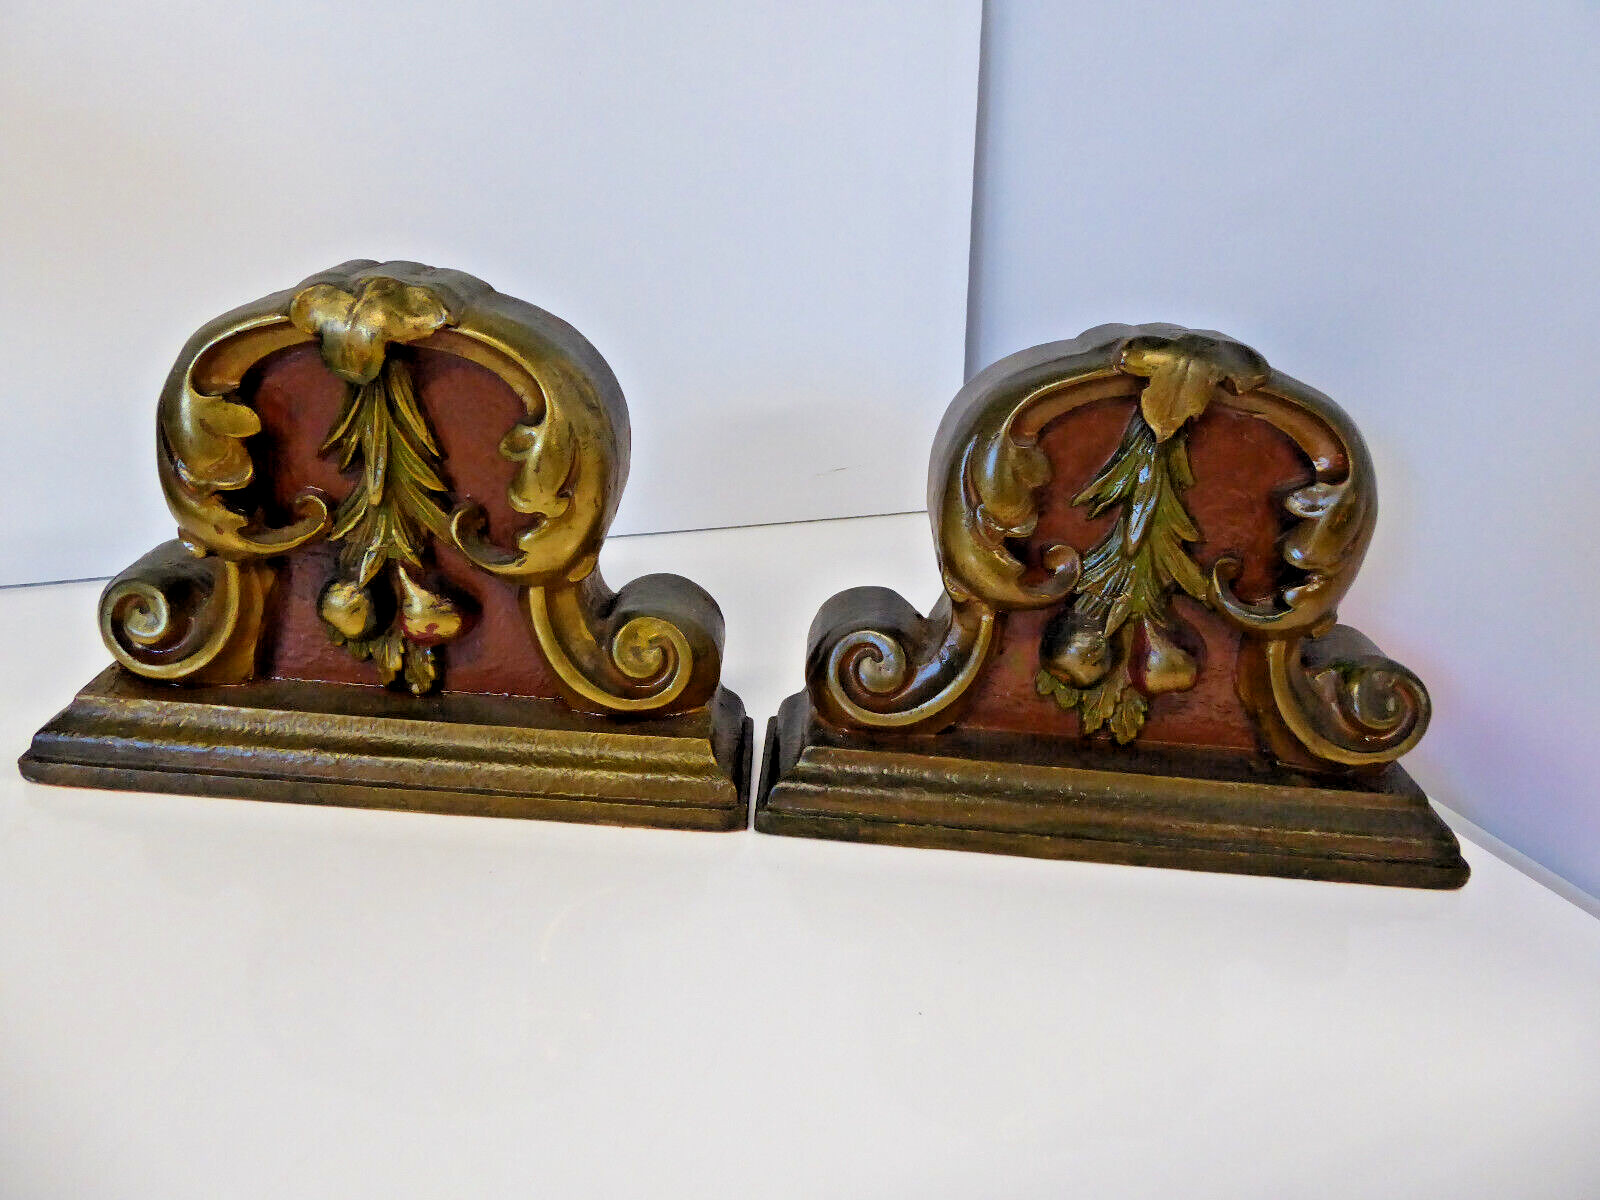 Large Antique Wood and Plaster? Bookends